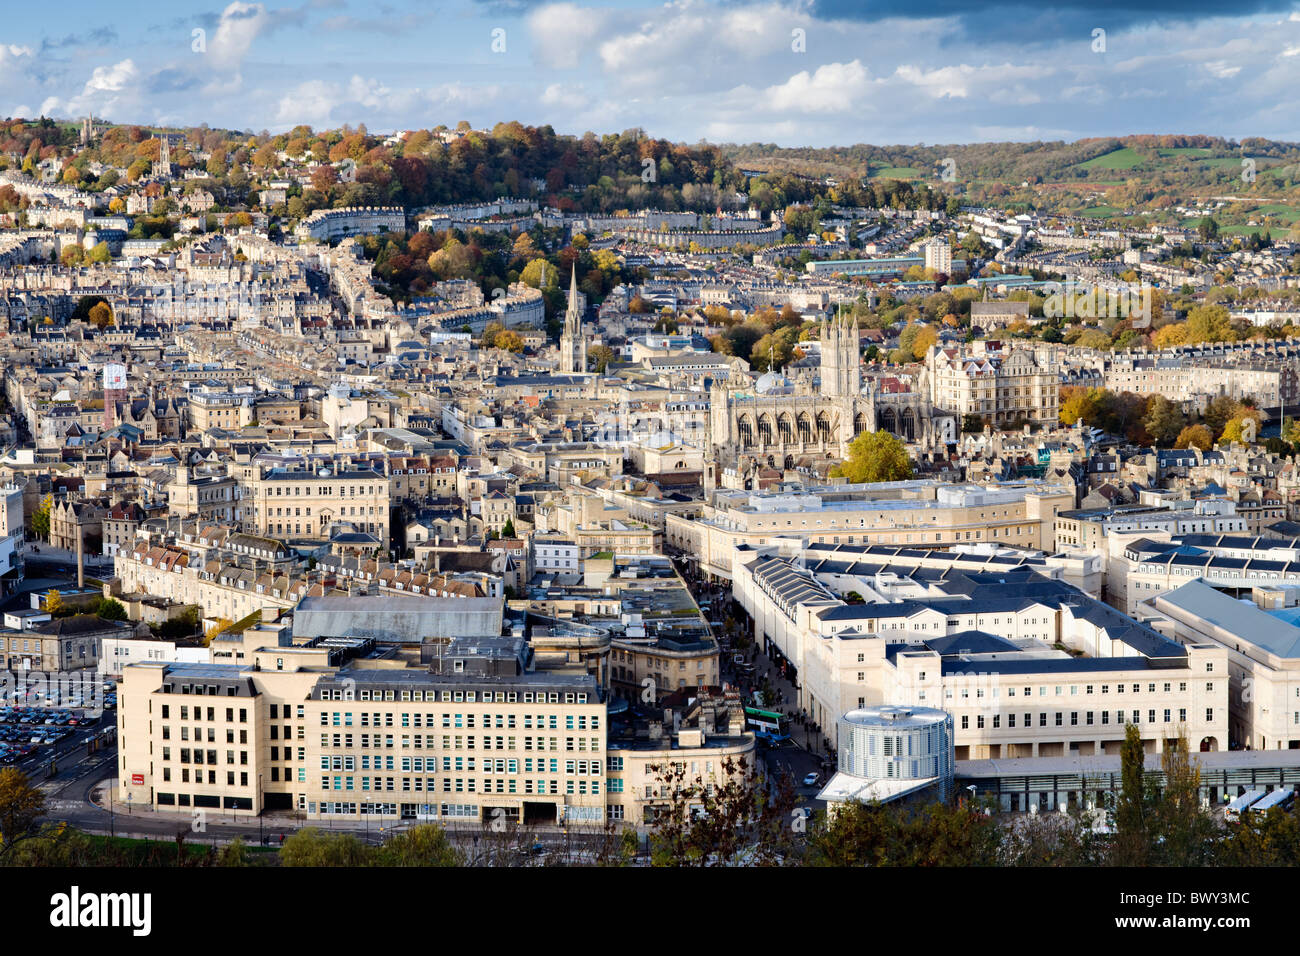 Autumn view over the historic city of Bath, Somerset, England showing streets, houses, shops, hotels, abbey and churches Stock Photo